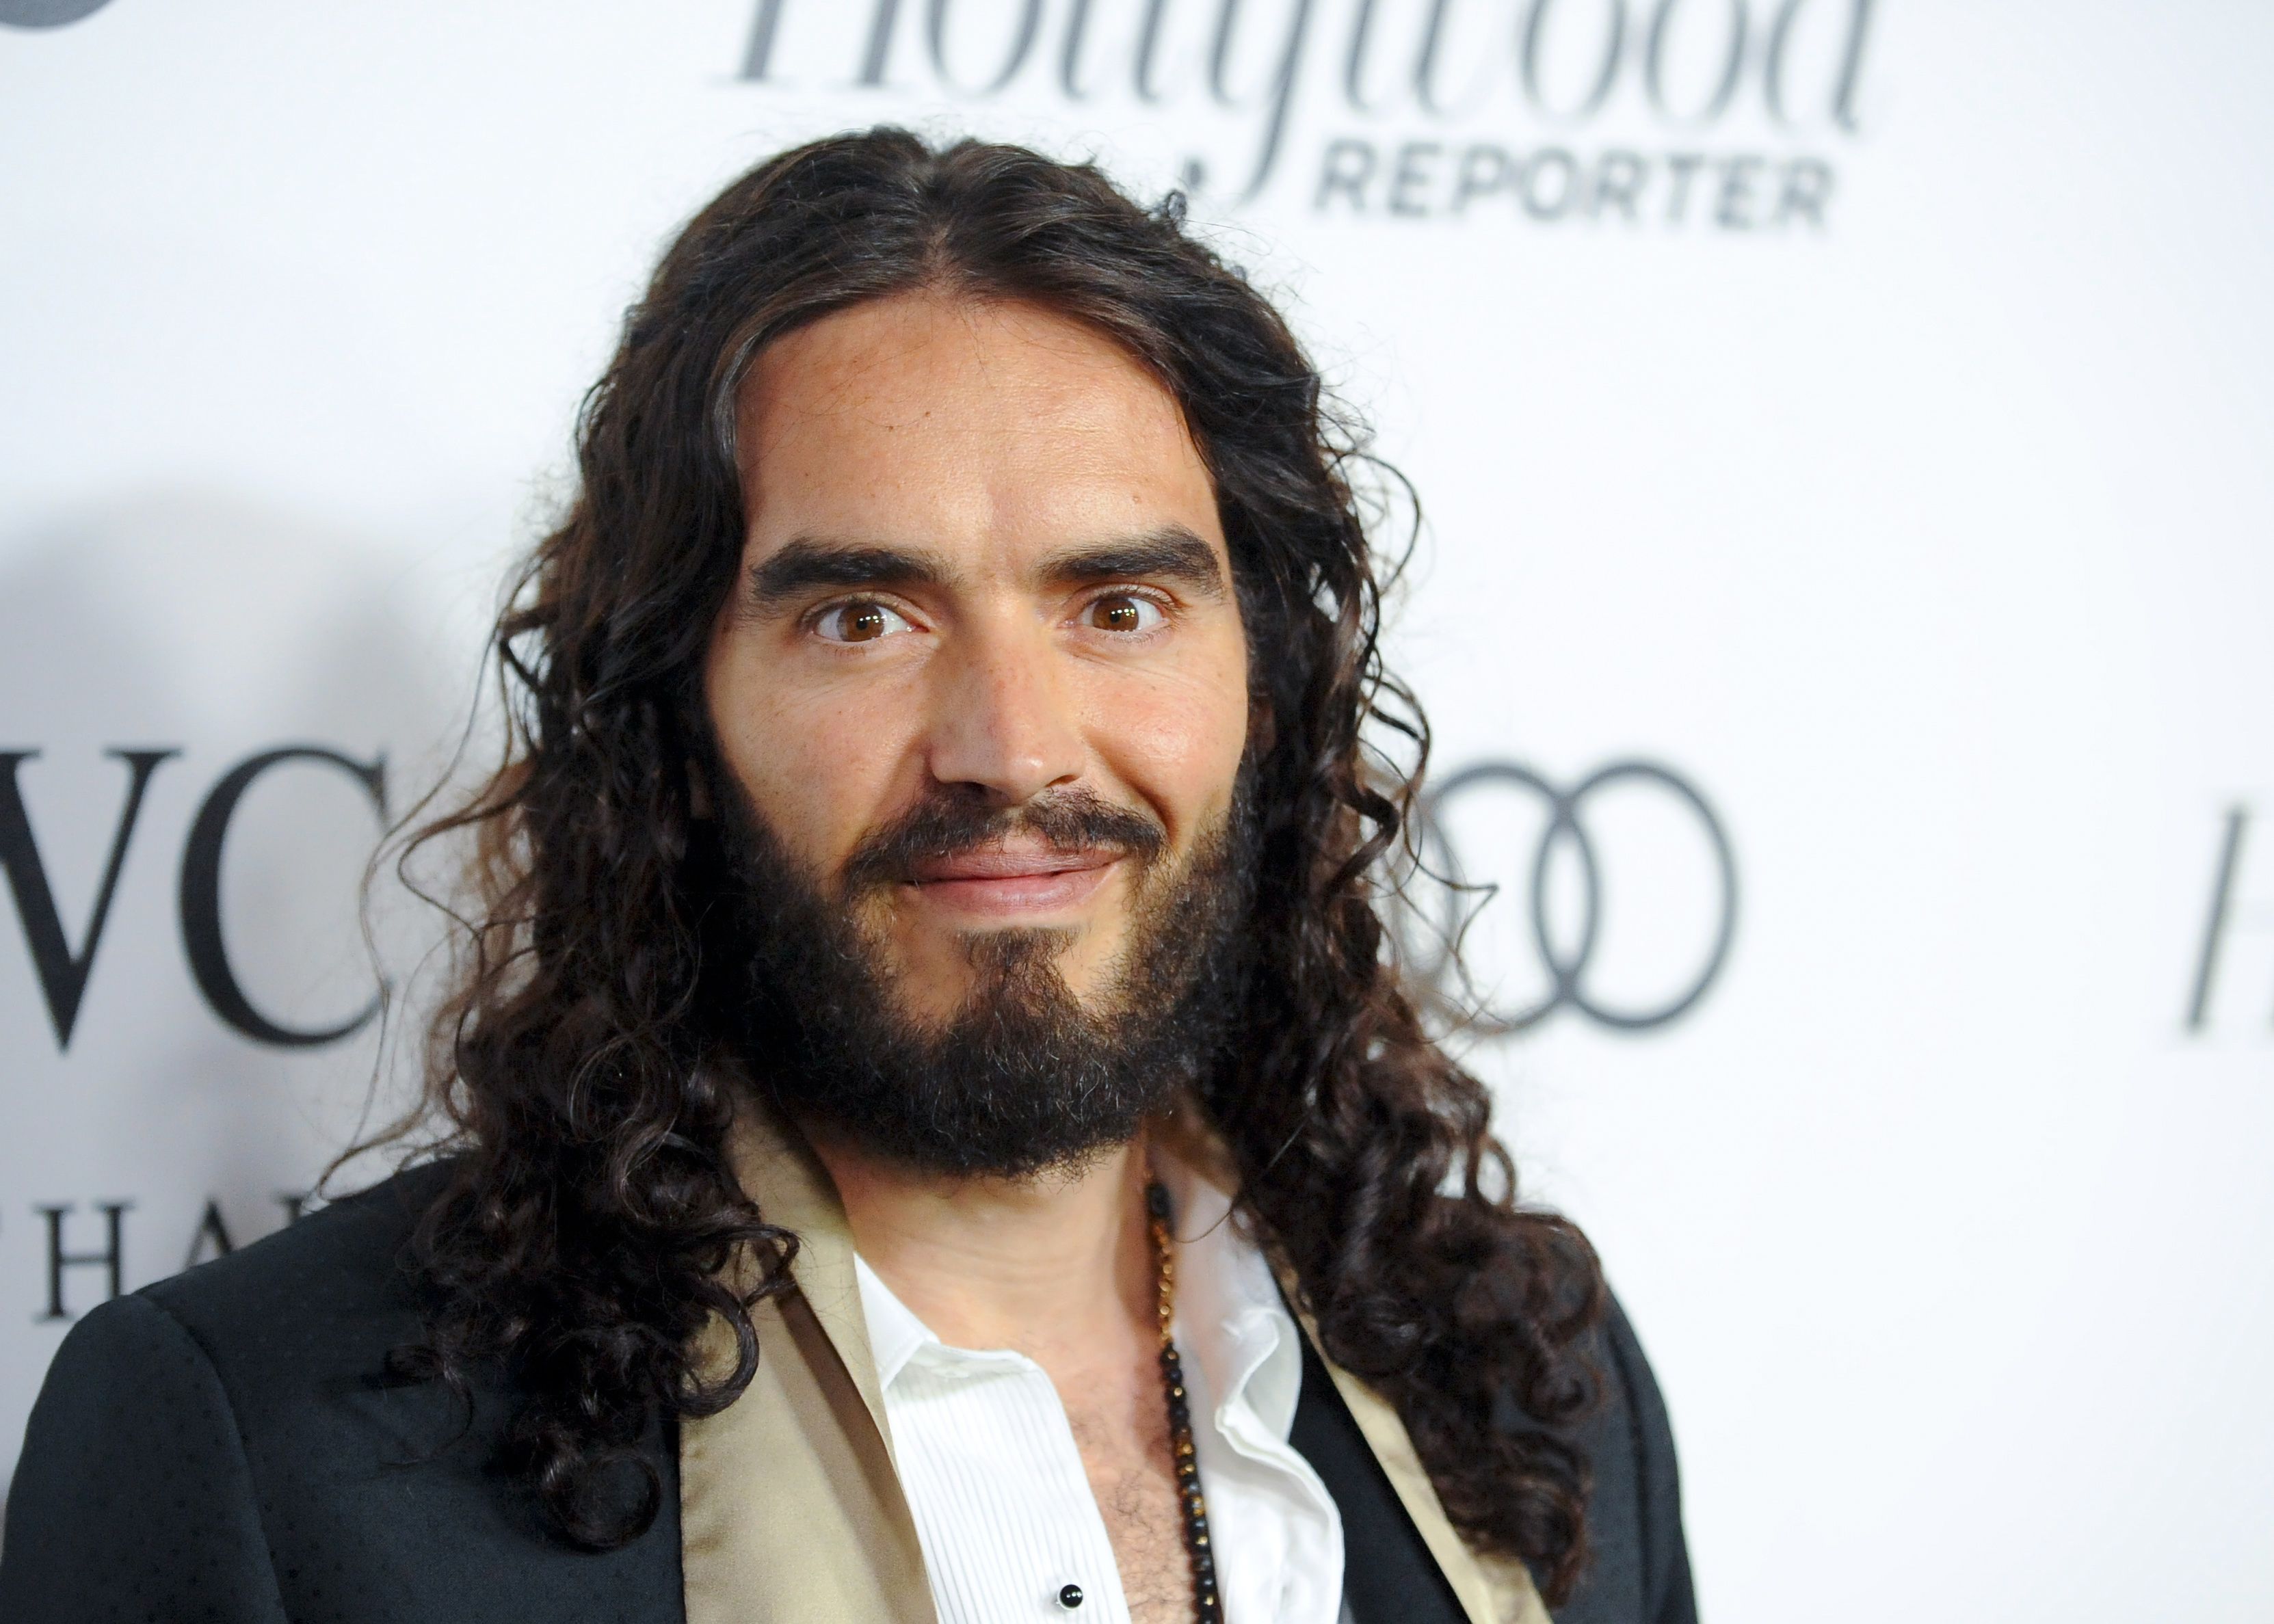 ‘I’m taking the plunge’: Russell Brand announces baptism